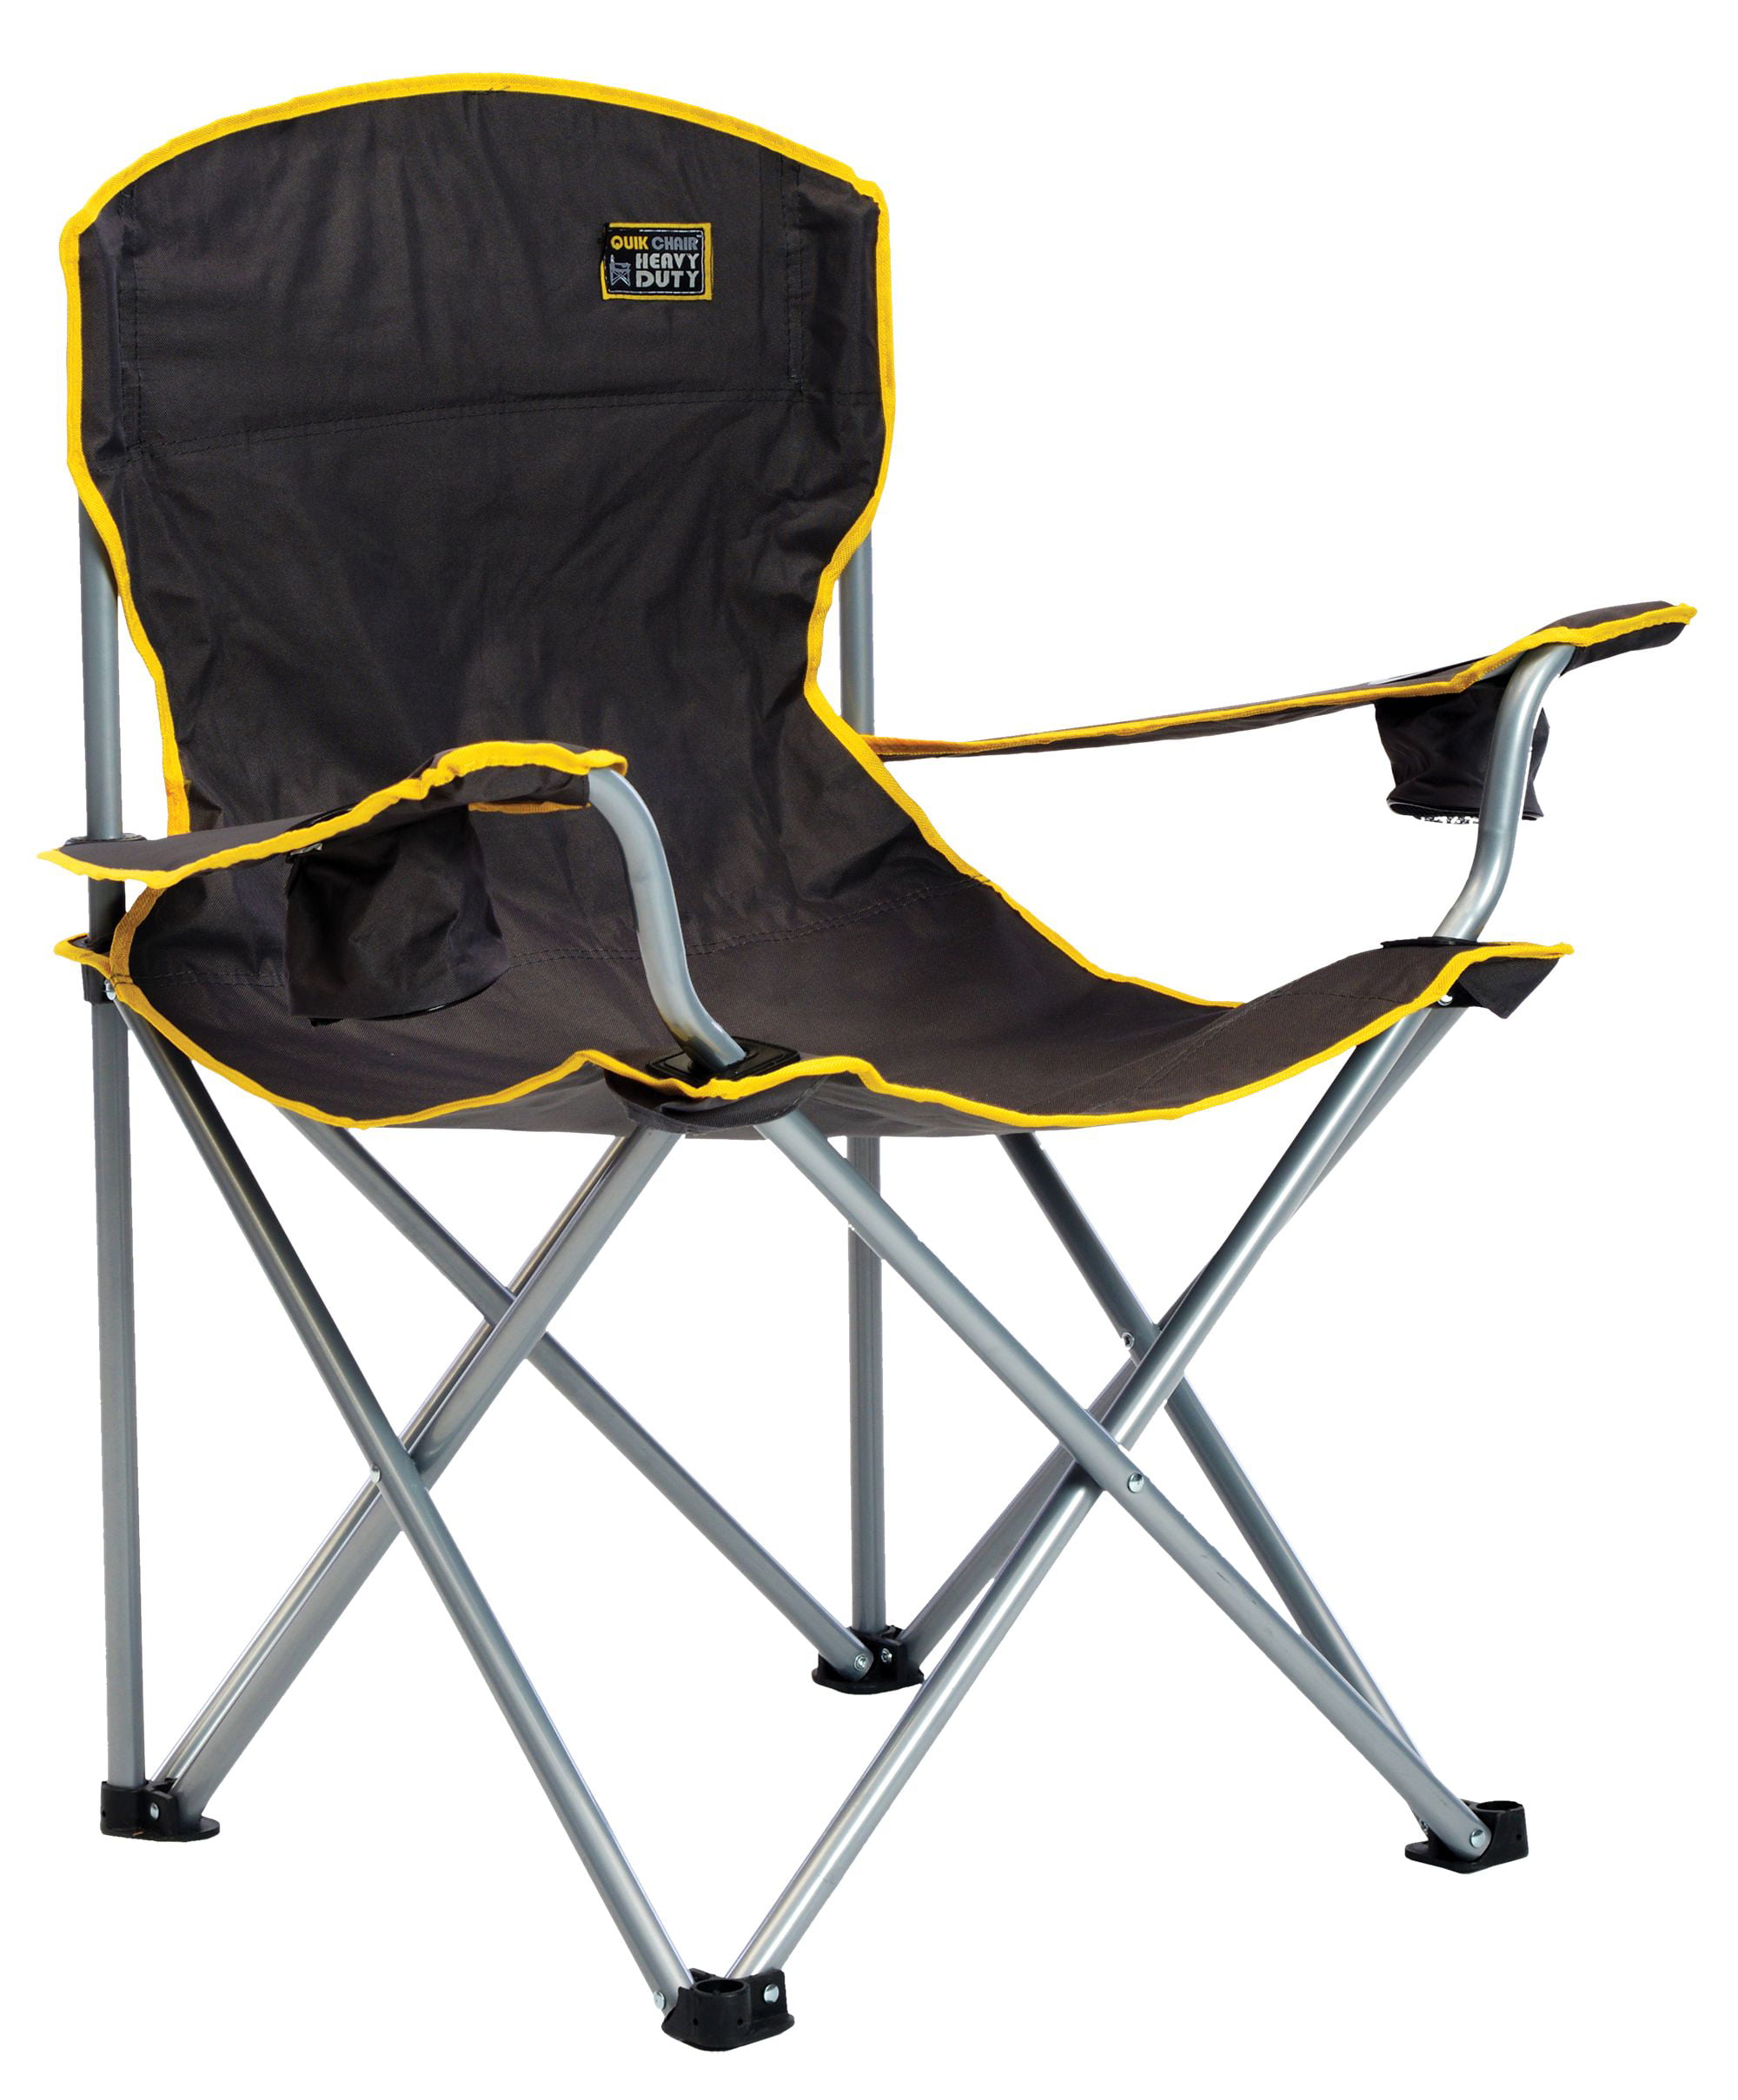 Creatice Folding Chair Camping Walmart with Simple Decor